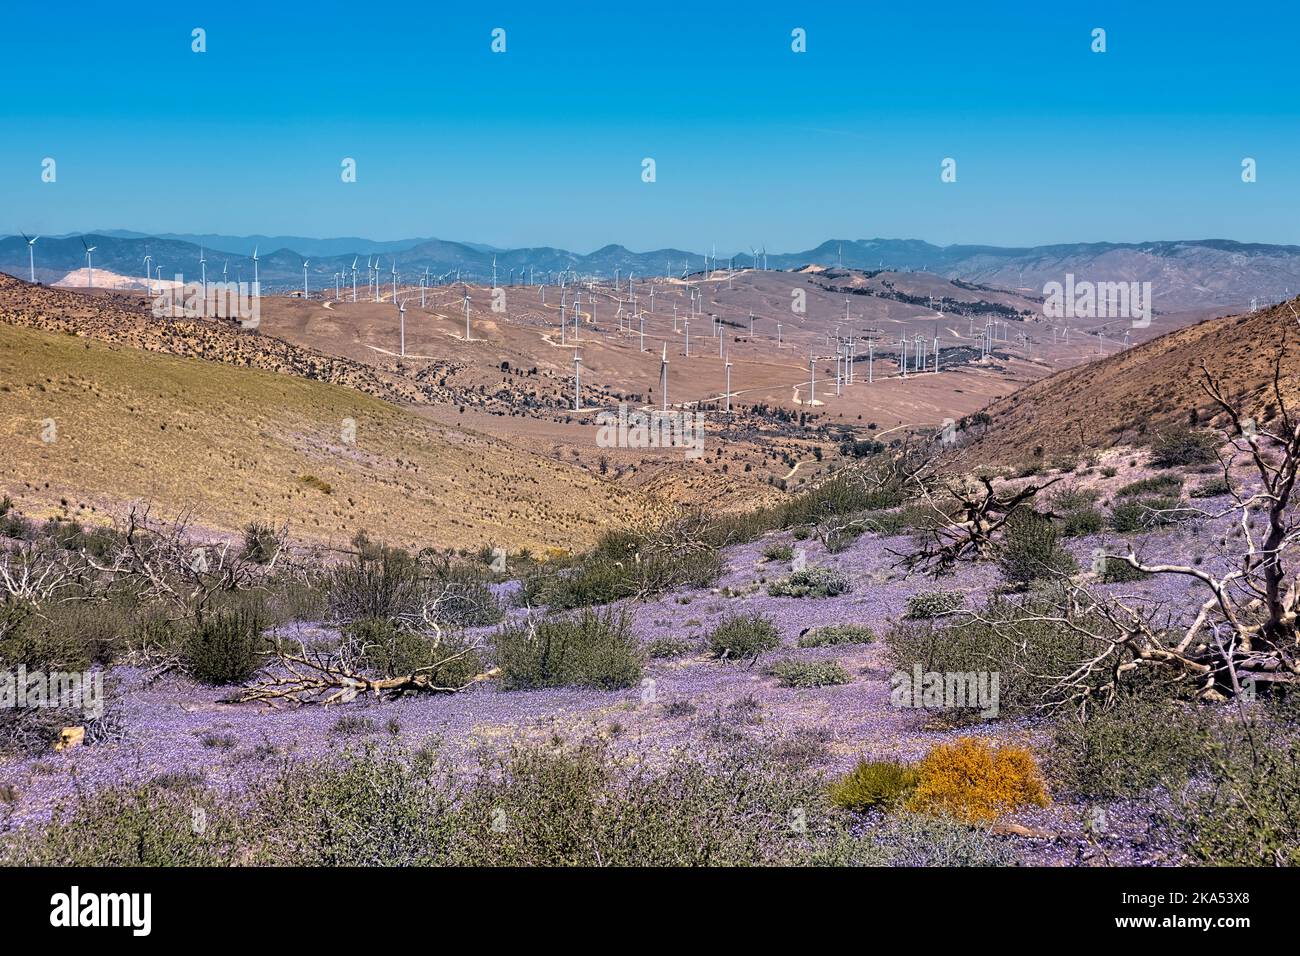 Wildflowers and windmills in the Mojave, Pacific Crest Trail, Tehachapi, California, USA Stock Photo